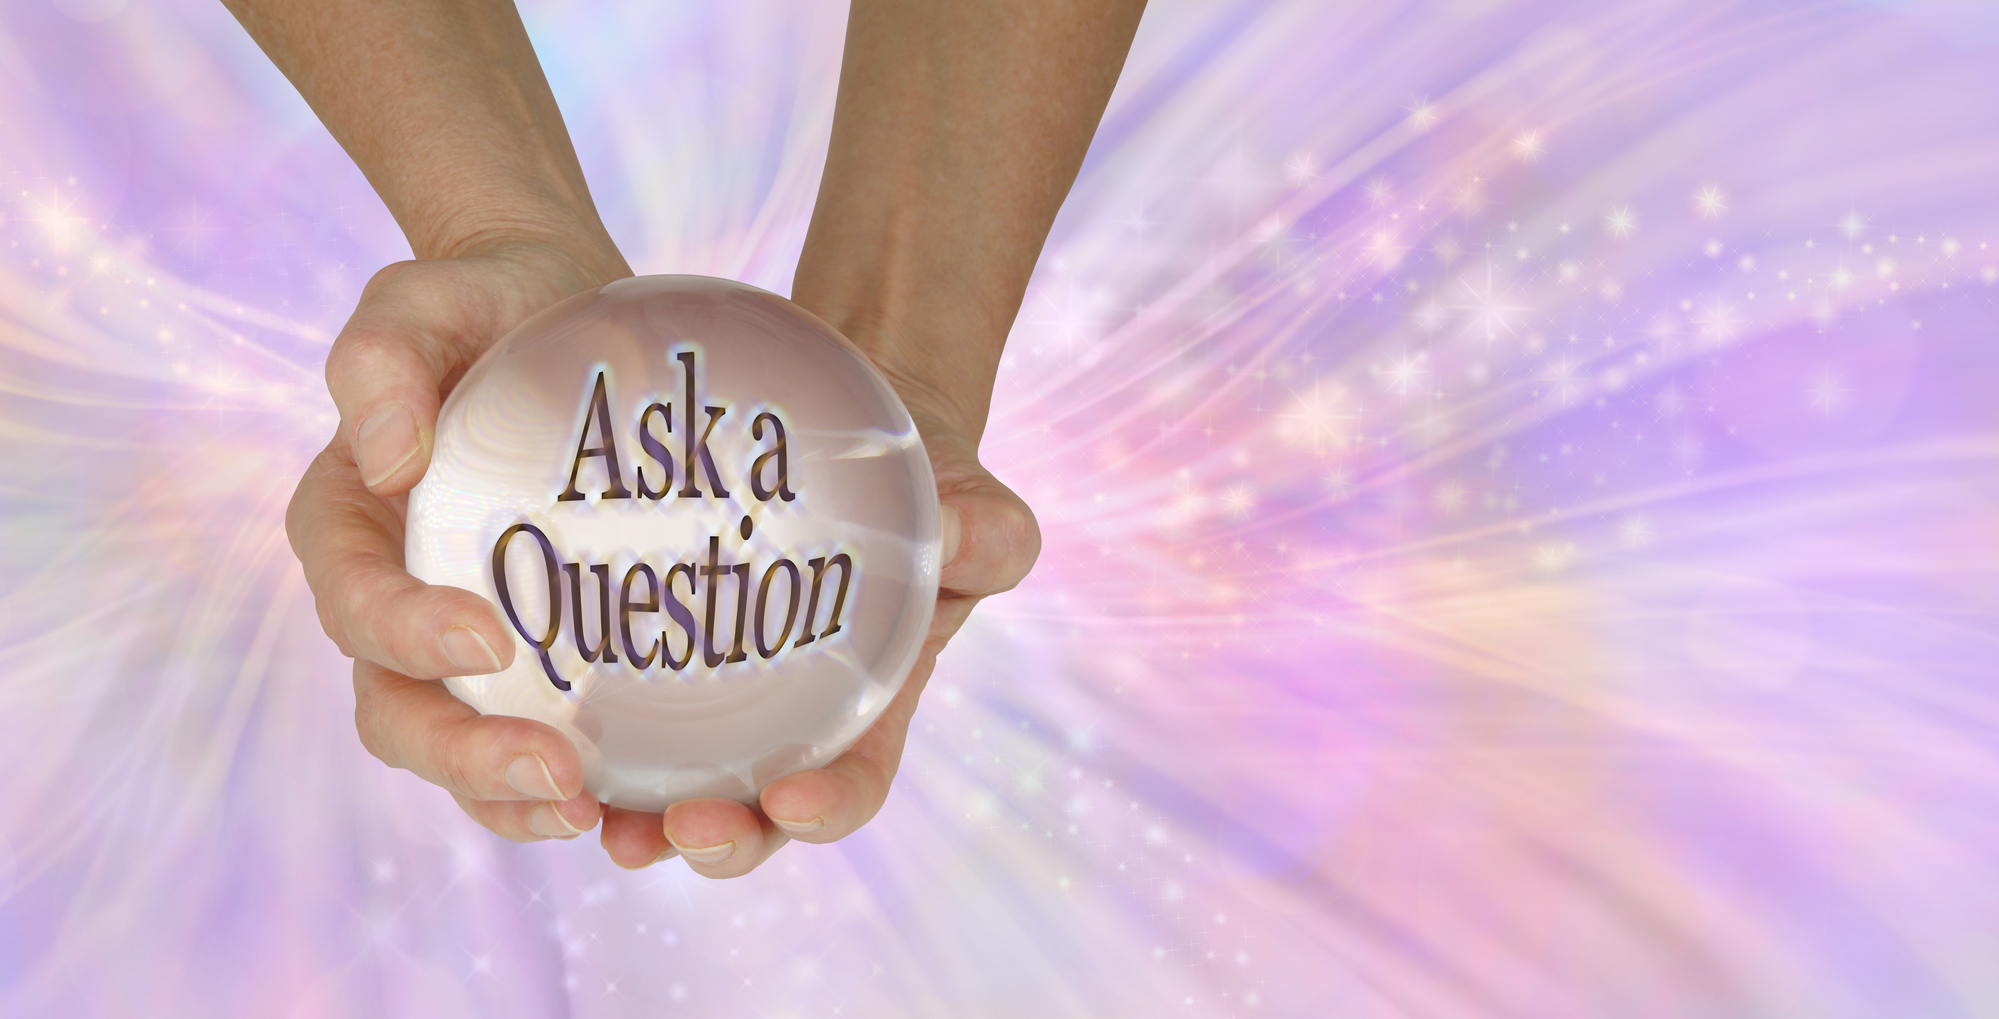 Psychic Readings: When to Get One and Top Reasons Why